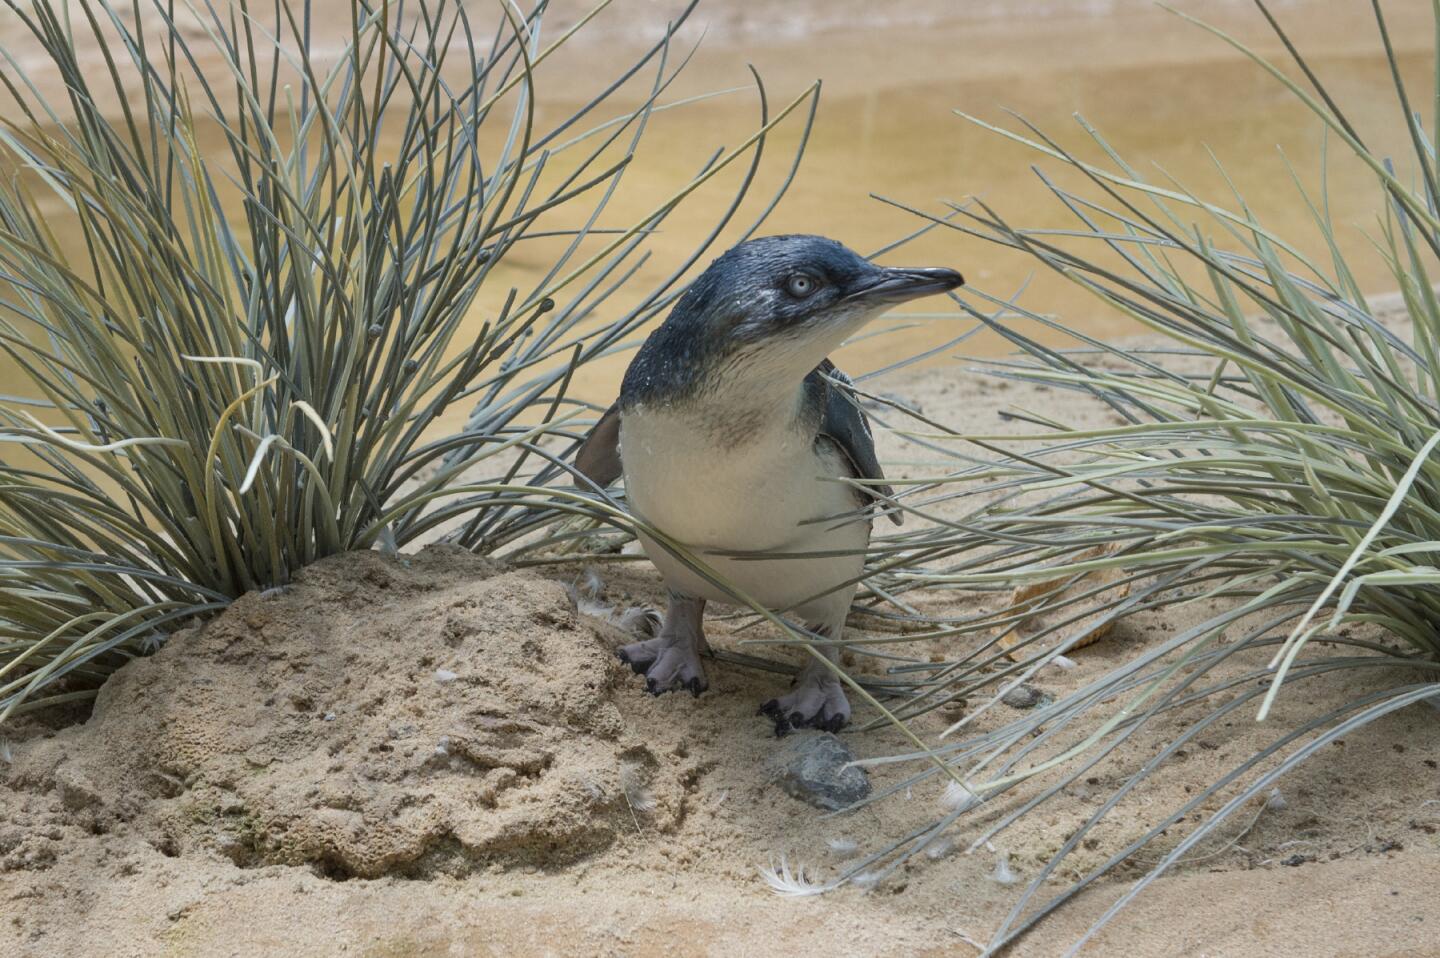 A "little penguin" chick is shown in its habitat at the Bronx Zoo in New York on July 25, 2016. Hatched on May 10, 2016, it is the first "little penguin" born there in the zoo's 120-year history.